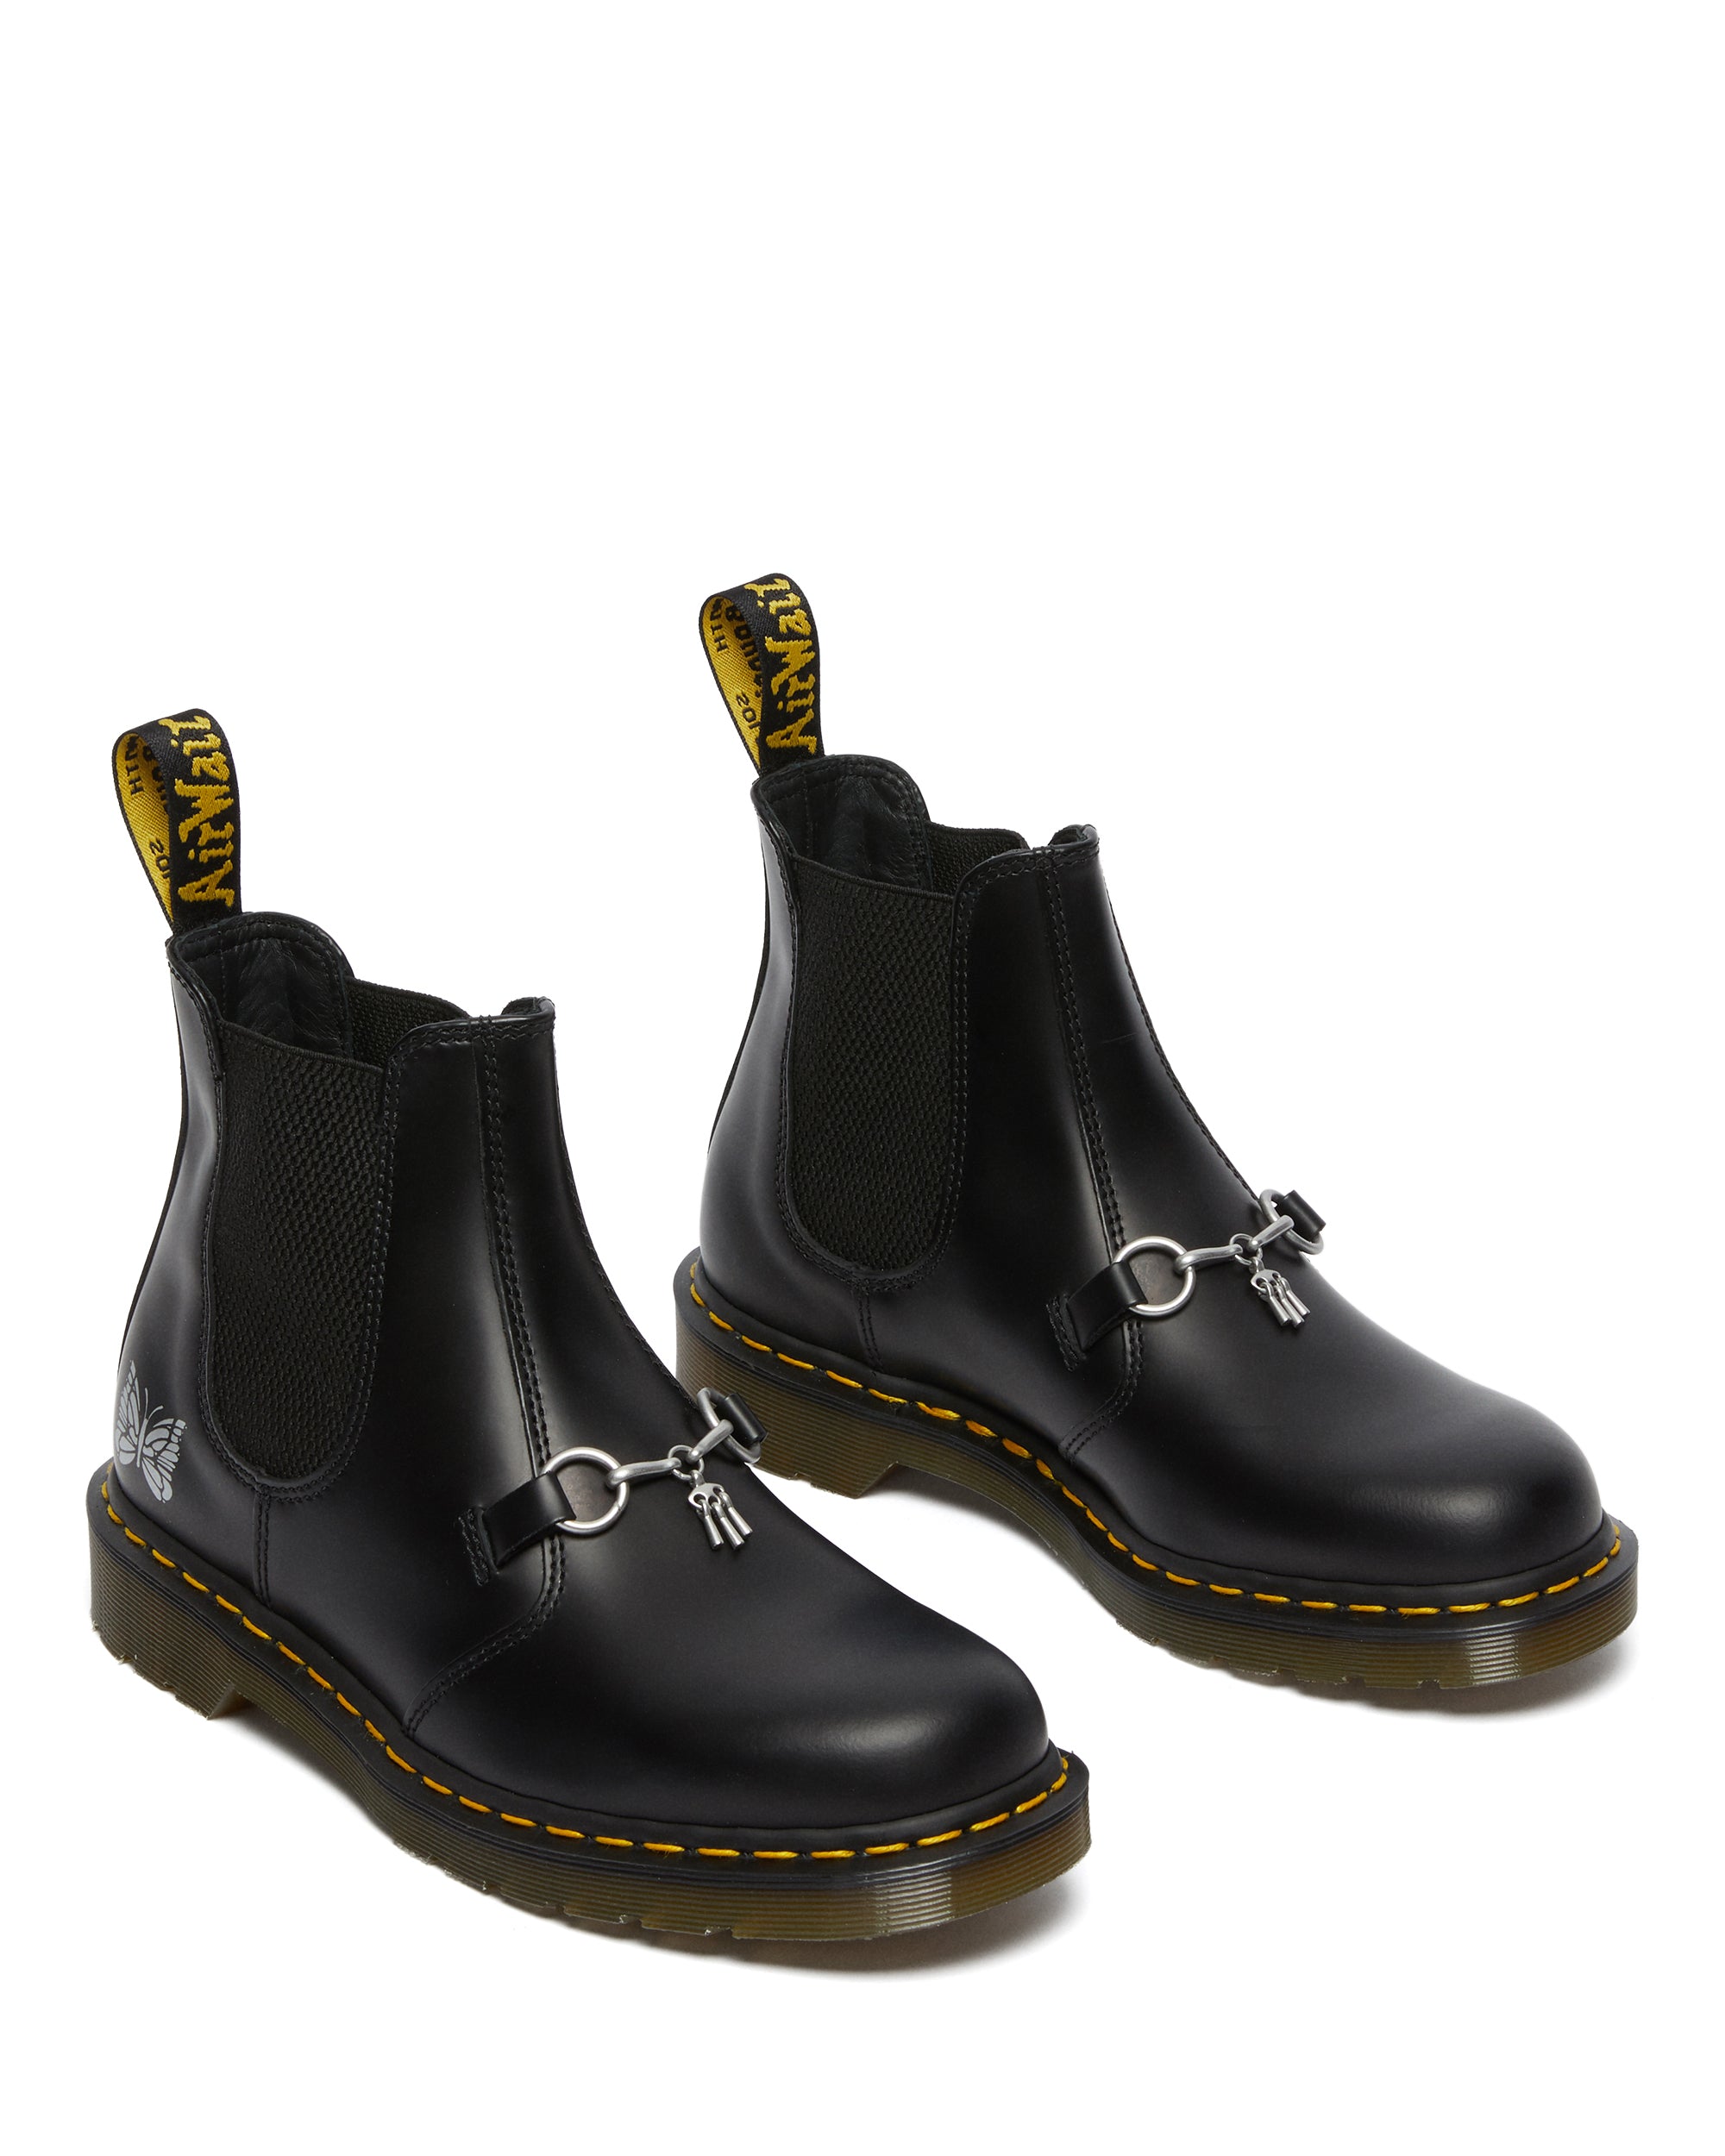 [SPECIAL RELEASE] Needles X Dr. Martens 2976 Boot